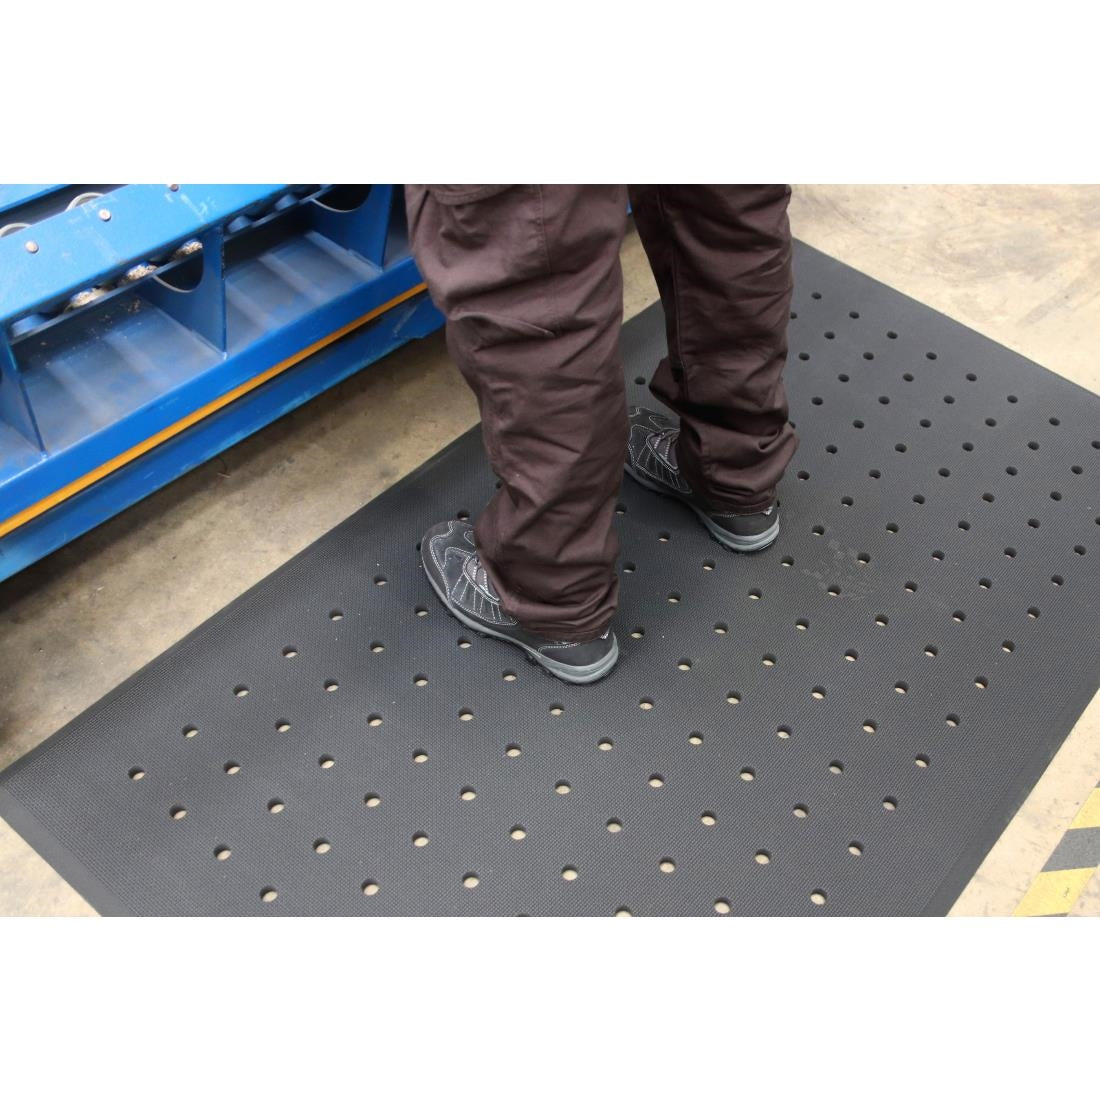 FT342 COBA Hygimat Anti-Fatigue Mat Black With Drainage Holes 0.9 x 1.5m JD Catering Equipment Solutions Ltd